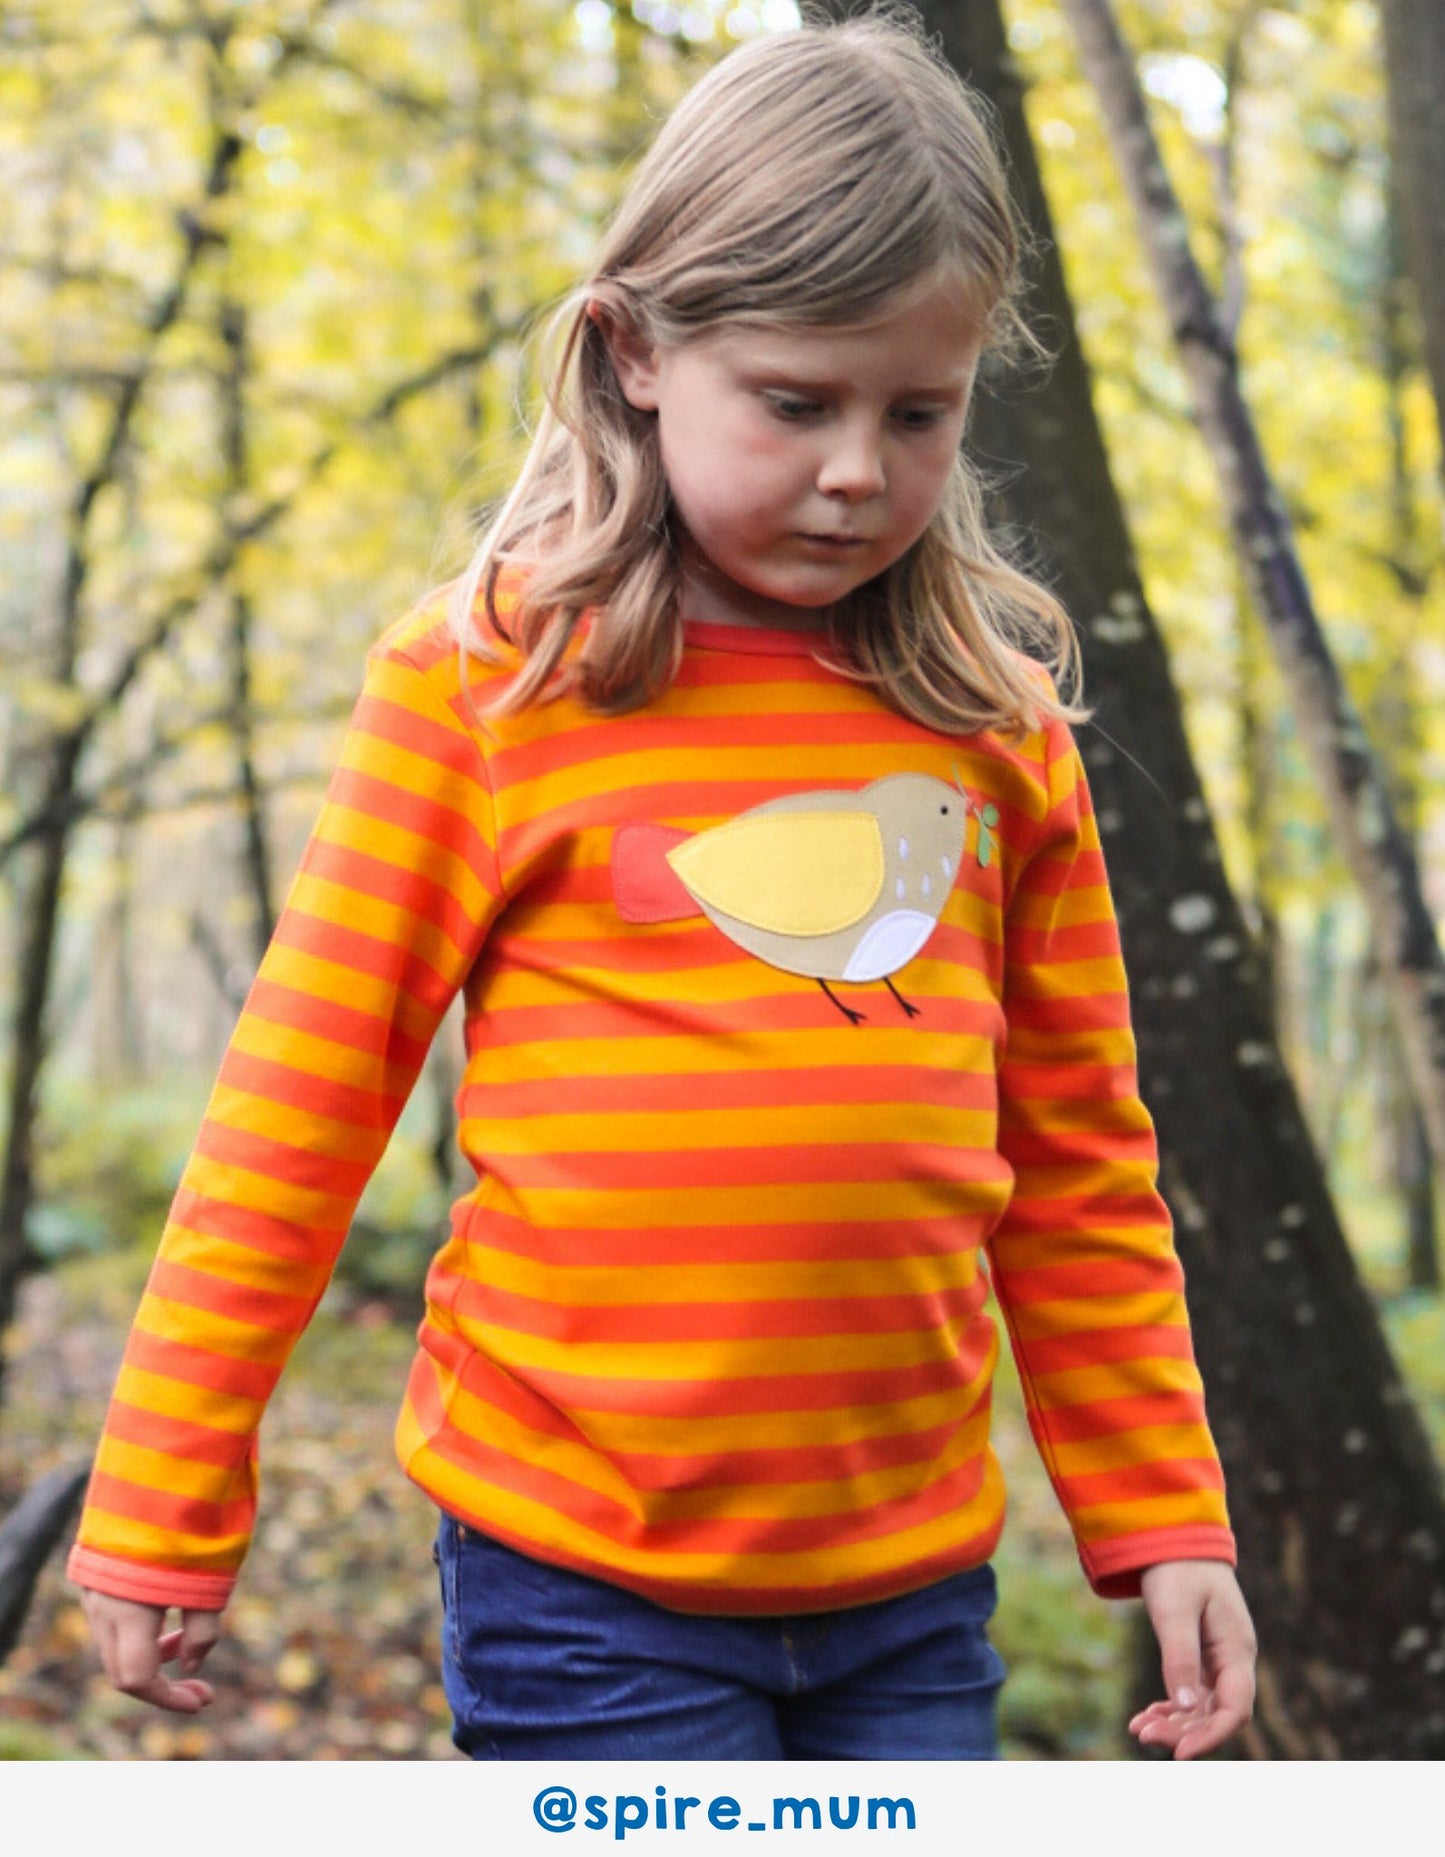 Organic Sparrow Applique Long-Sleeved T-Shirt - Toby Tiger